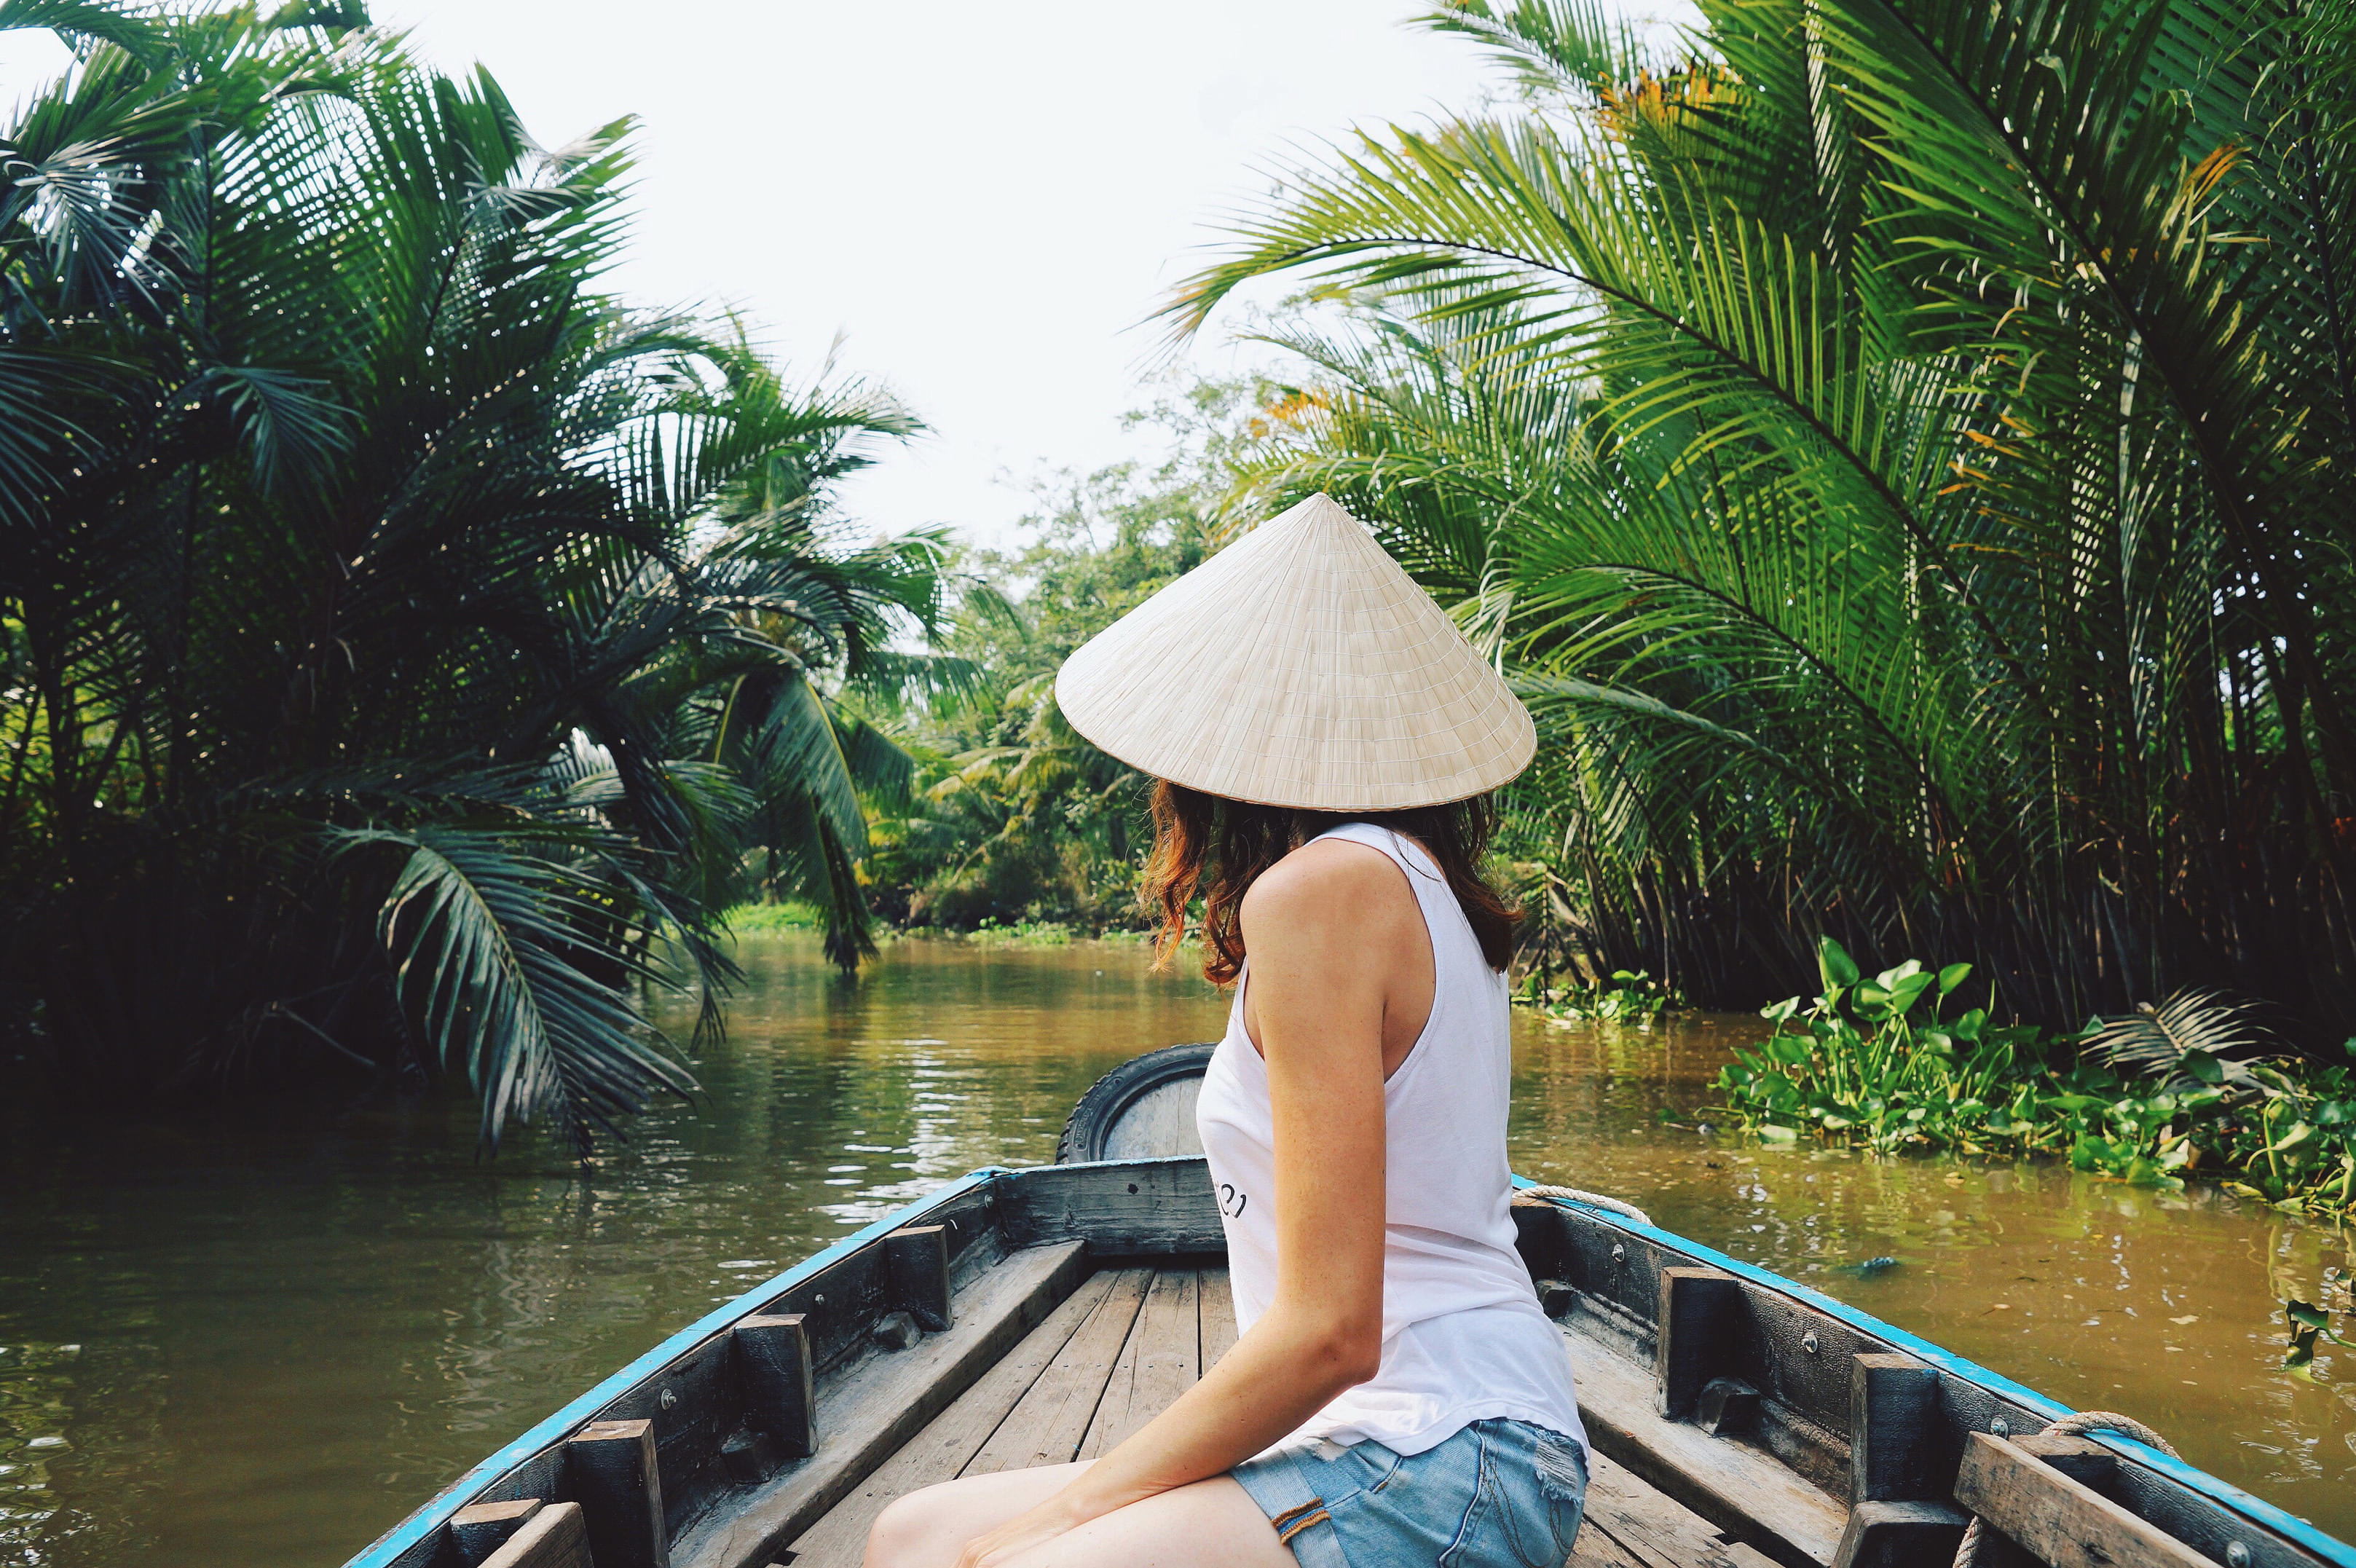 Join this amazing tour to the Mekong Delta